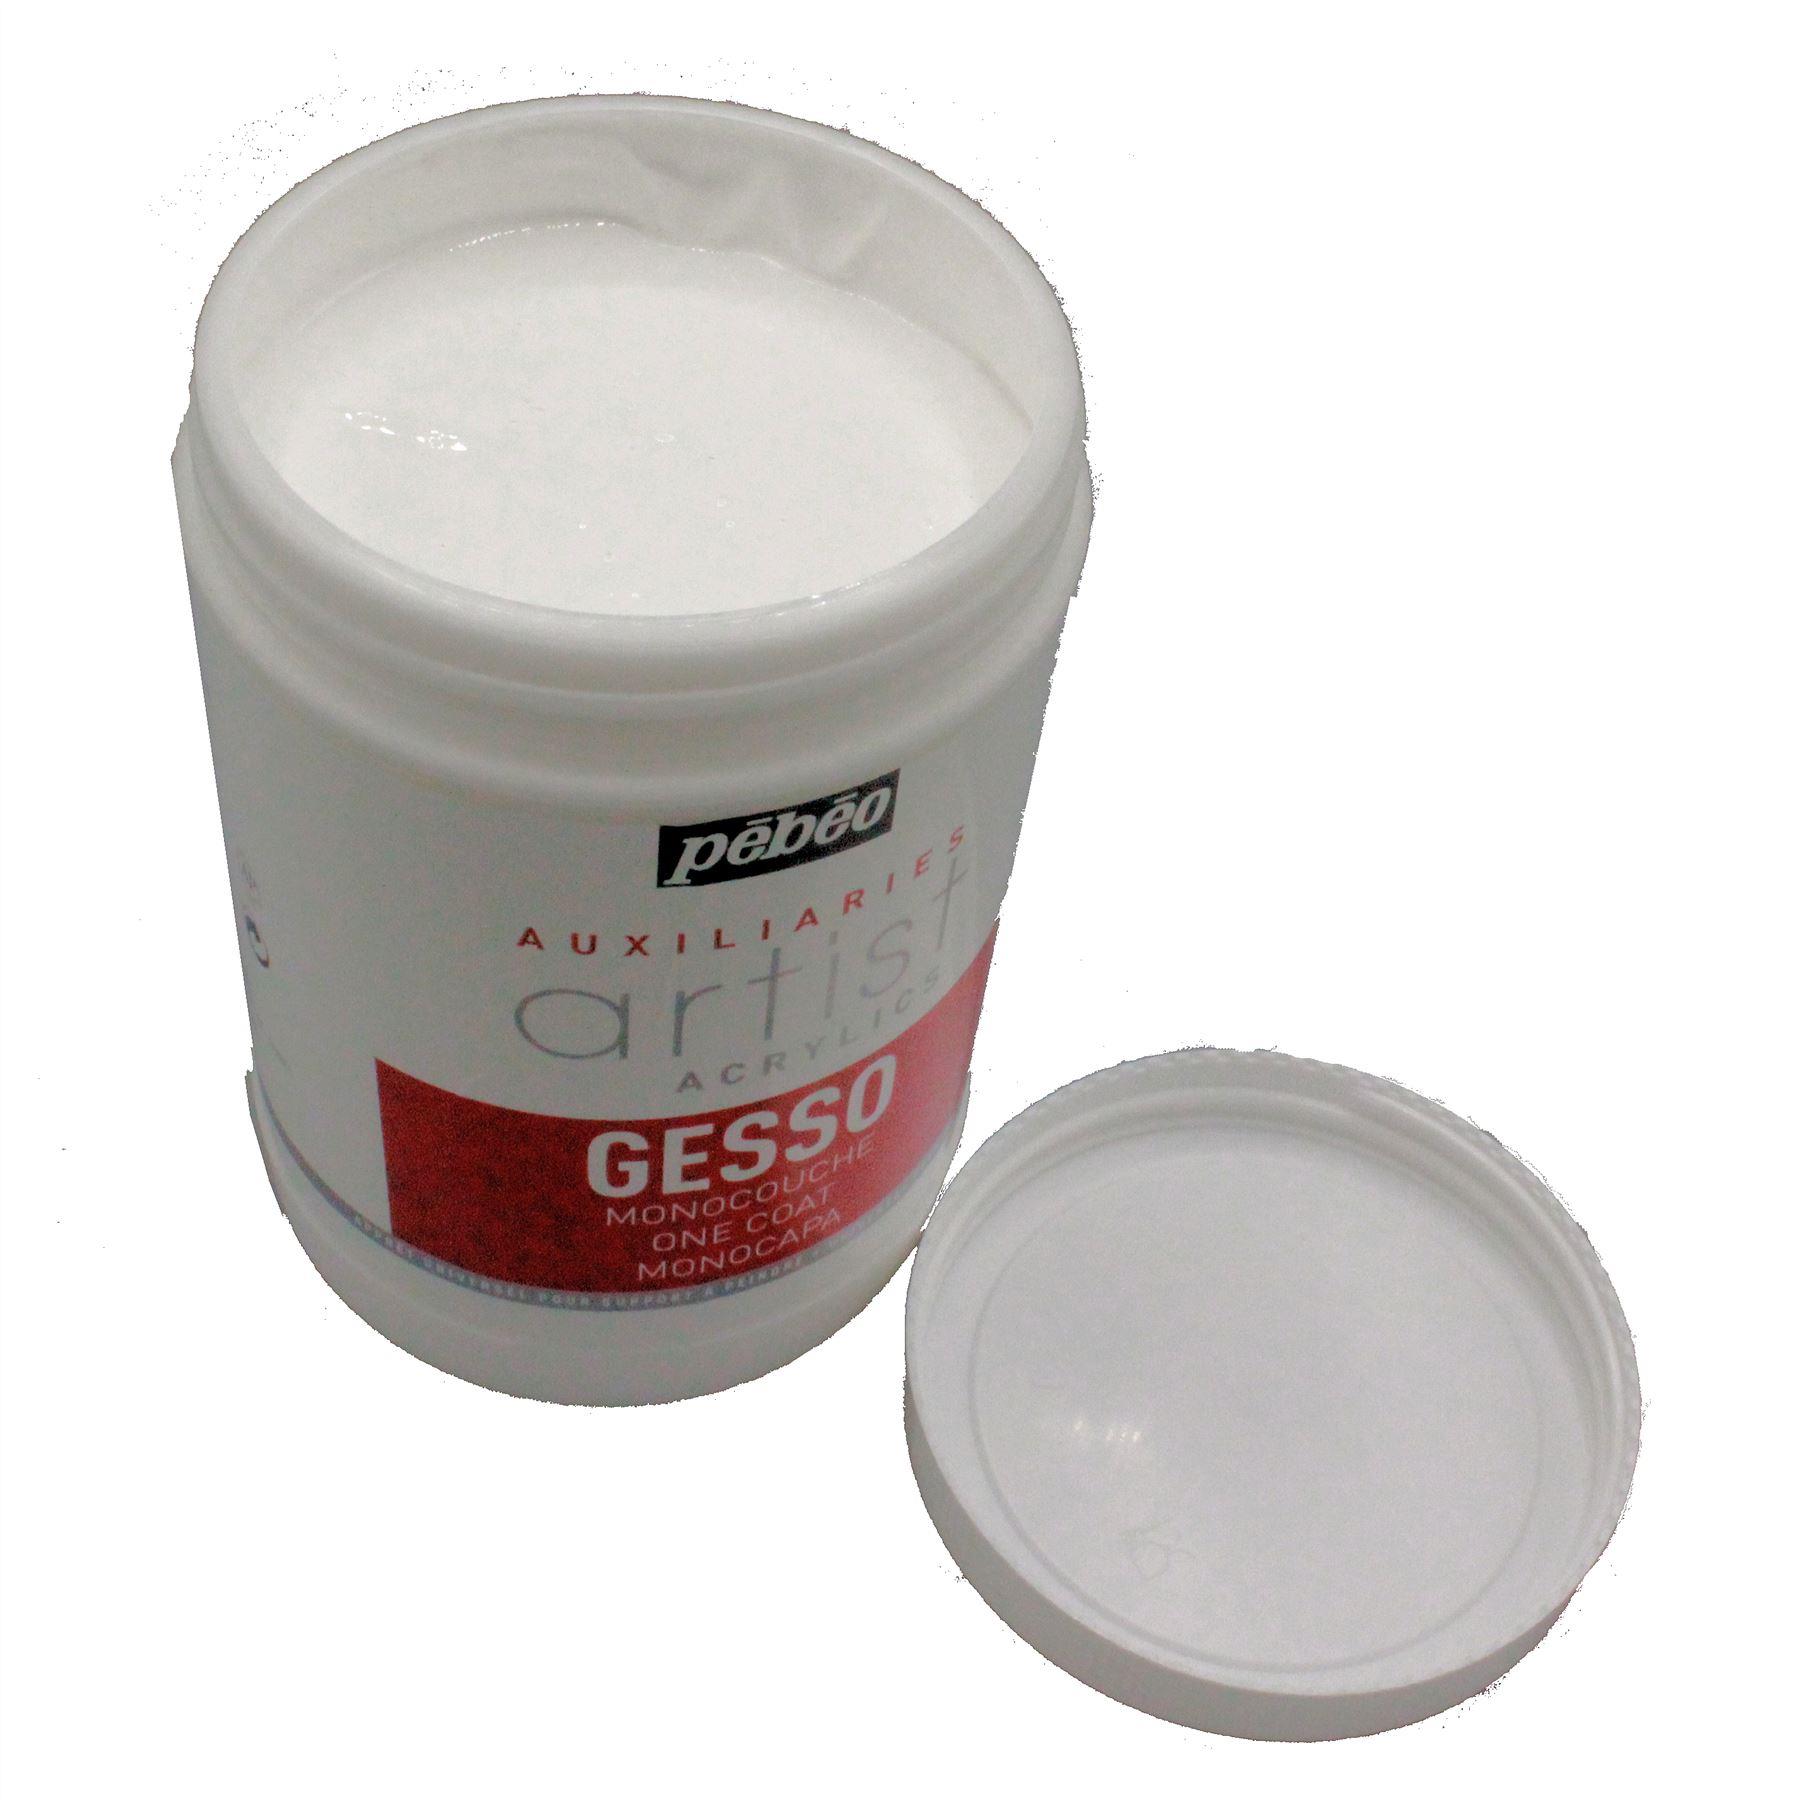 local art shop gesso primer by pebeo artists one coat